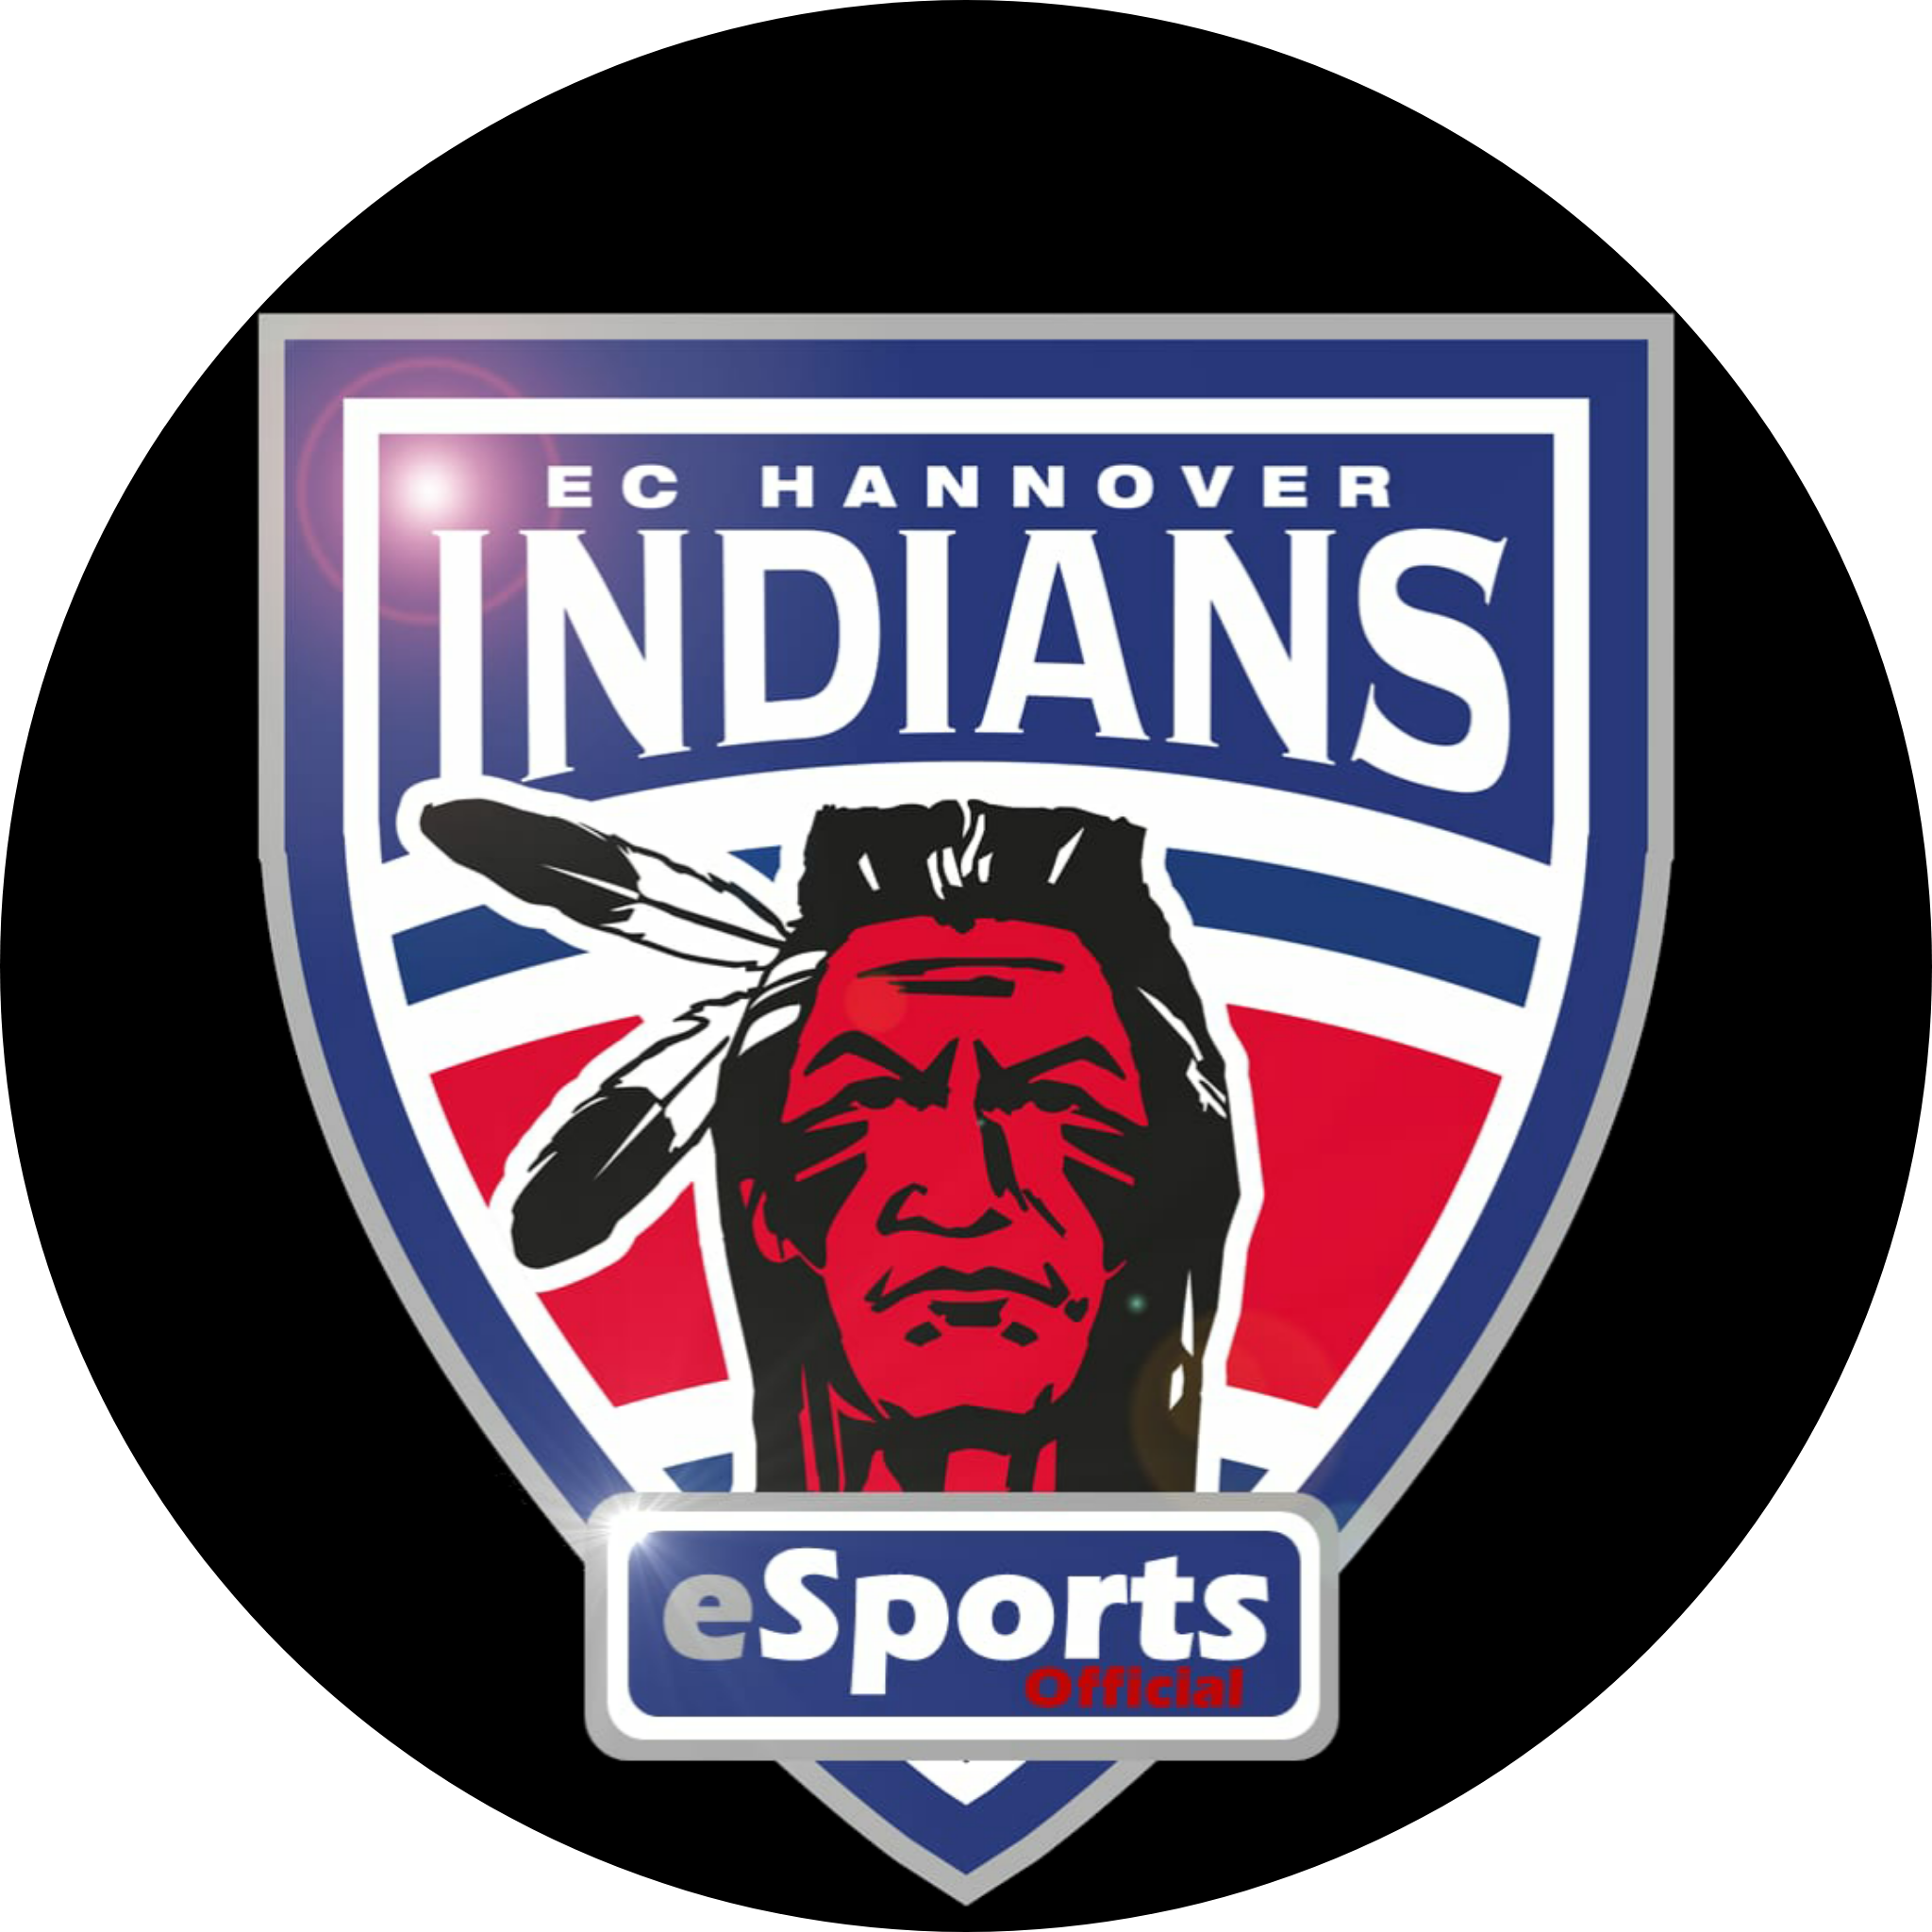 Hannover Indians Esports